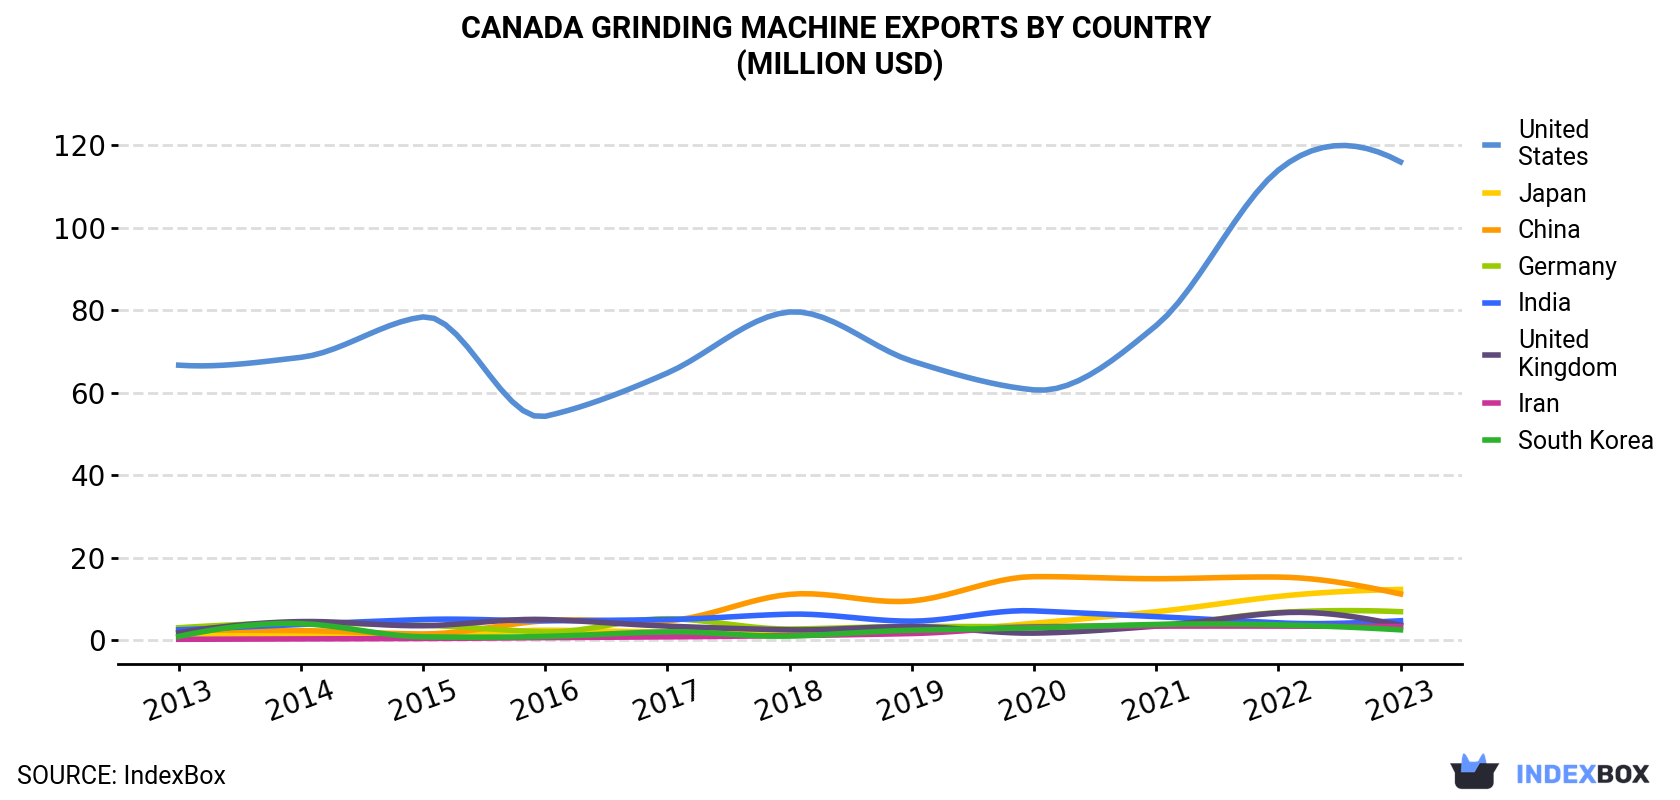 Canada Grinding Machine Exports By Country (Million USD)